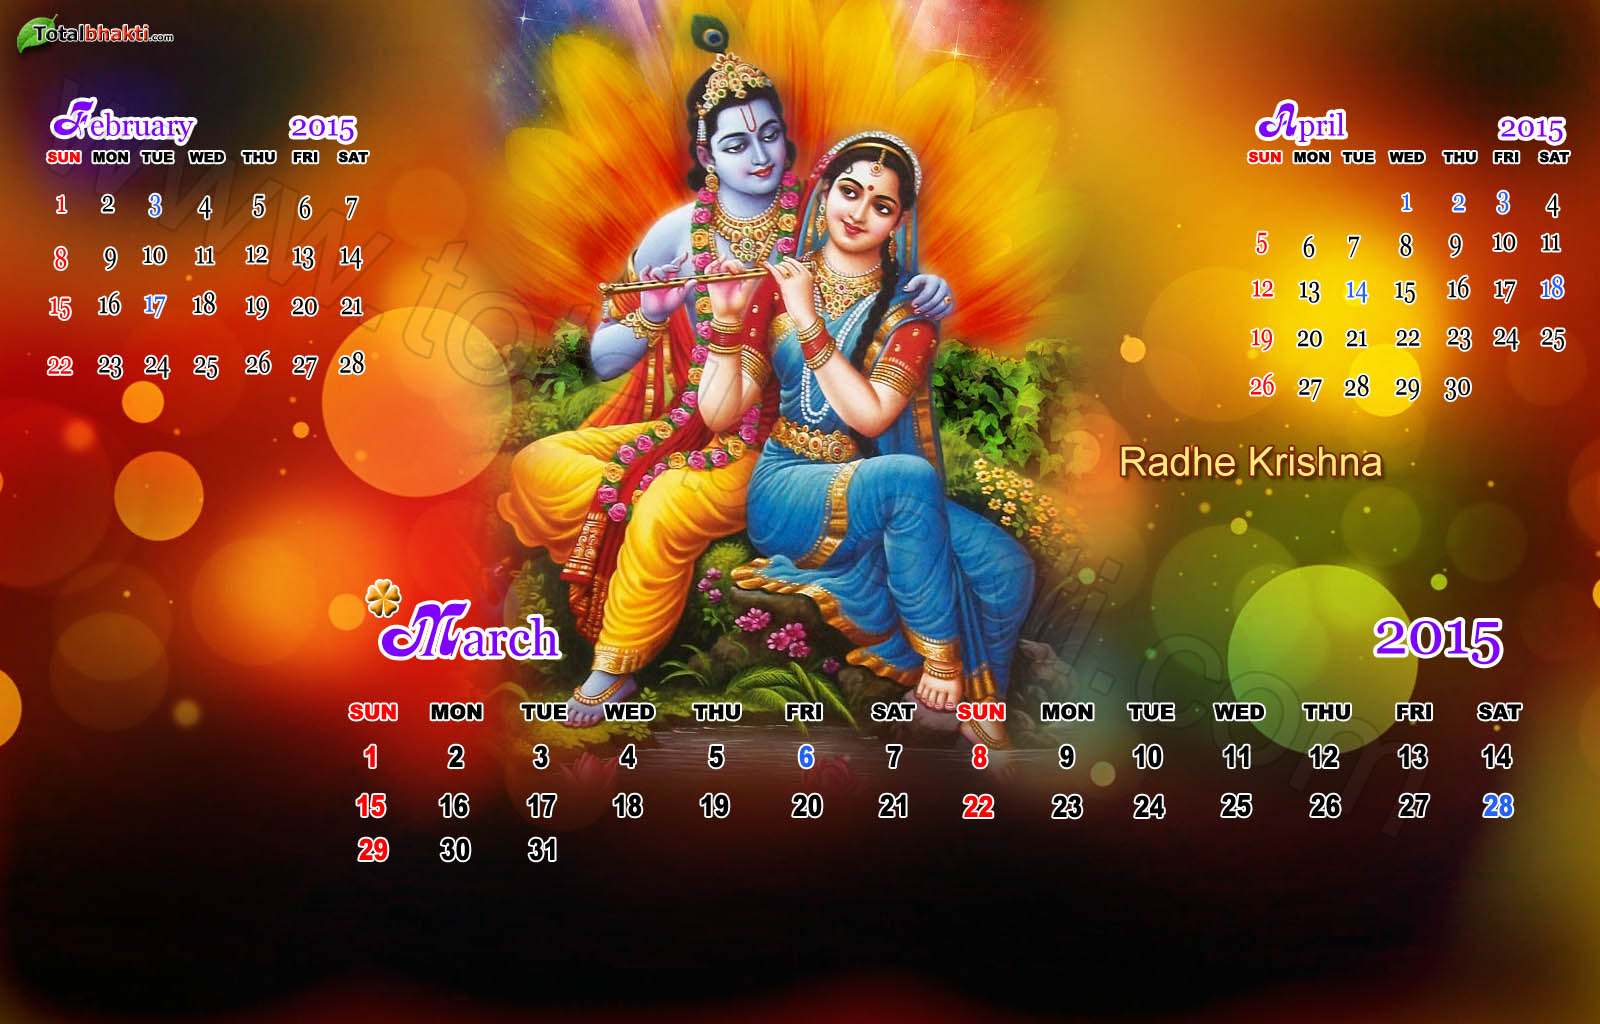 Archive Wallpaper Hindu Lord Krishna March Monthly